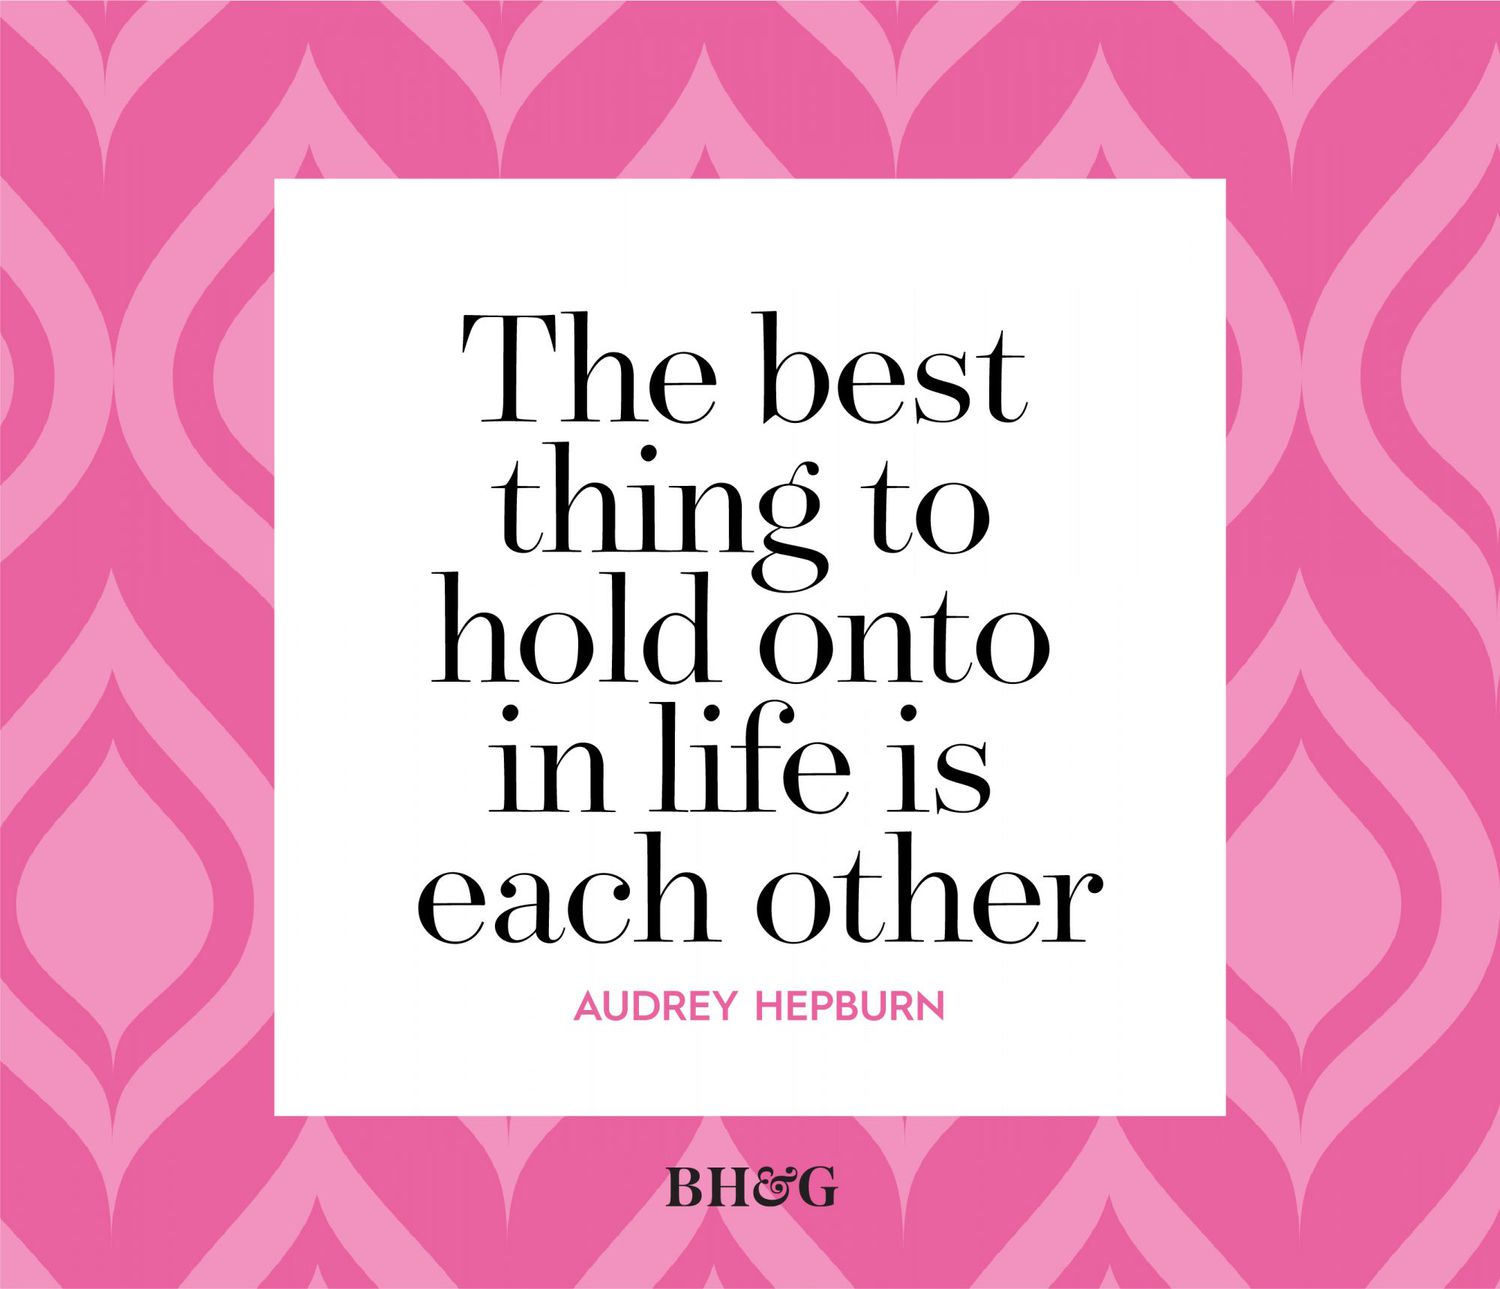 black Audrey Hepburn quote on a pink background